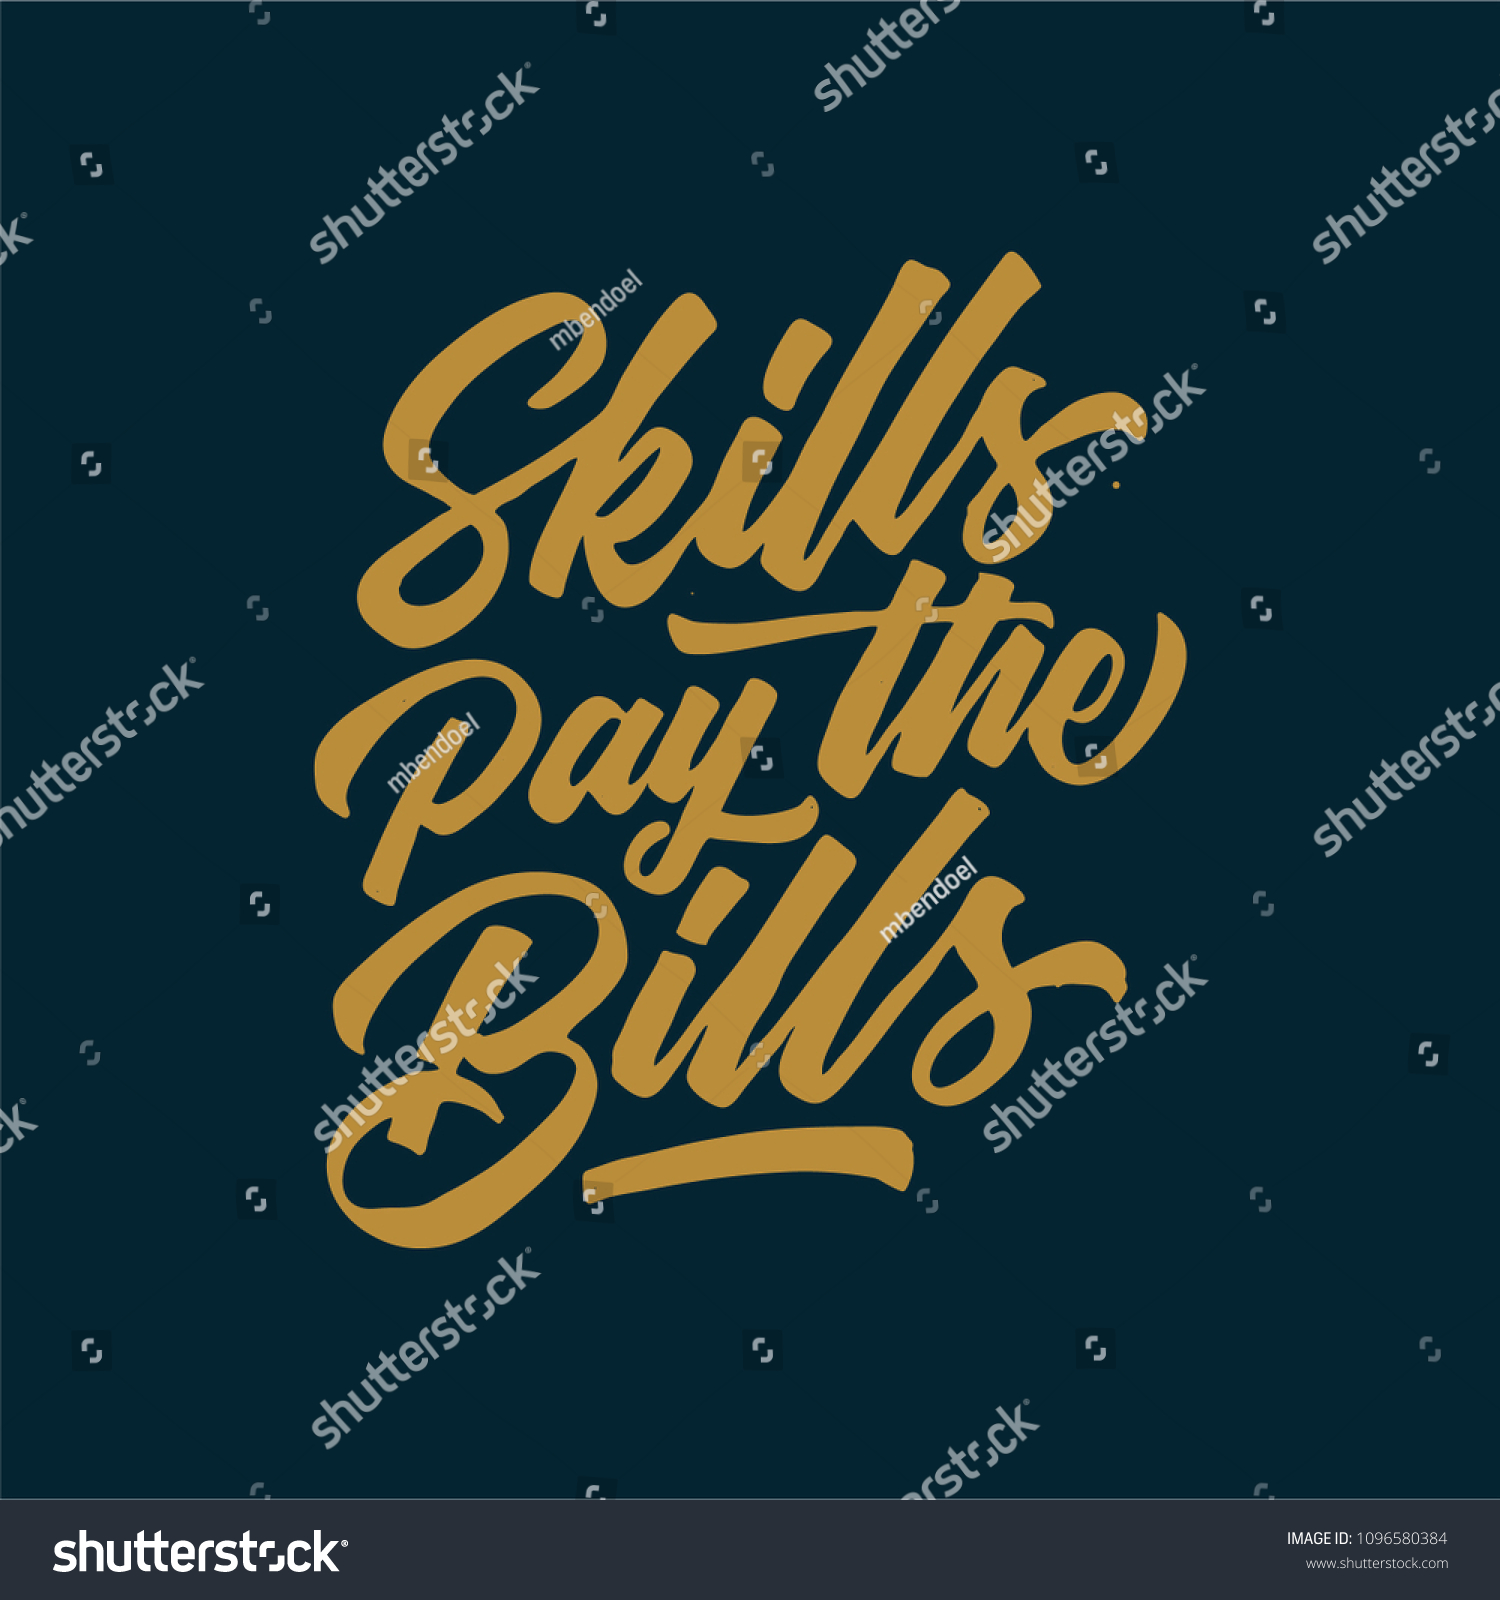 Skill Pay The Bills Lettering Quotes with Vintage Style Originial Handrawn  #1096580384